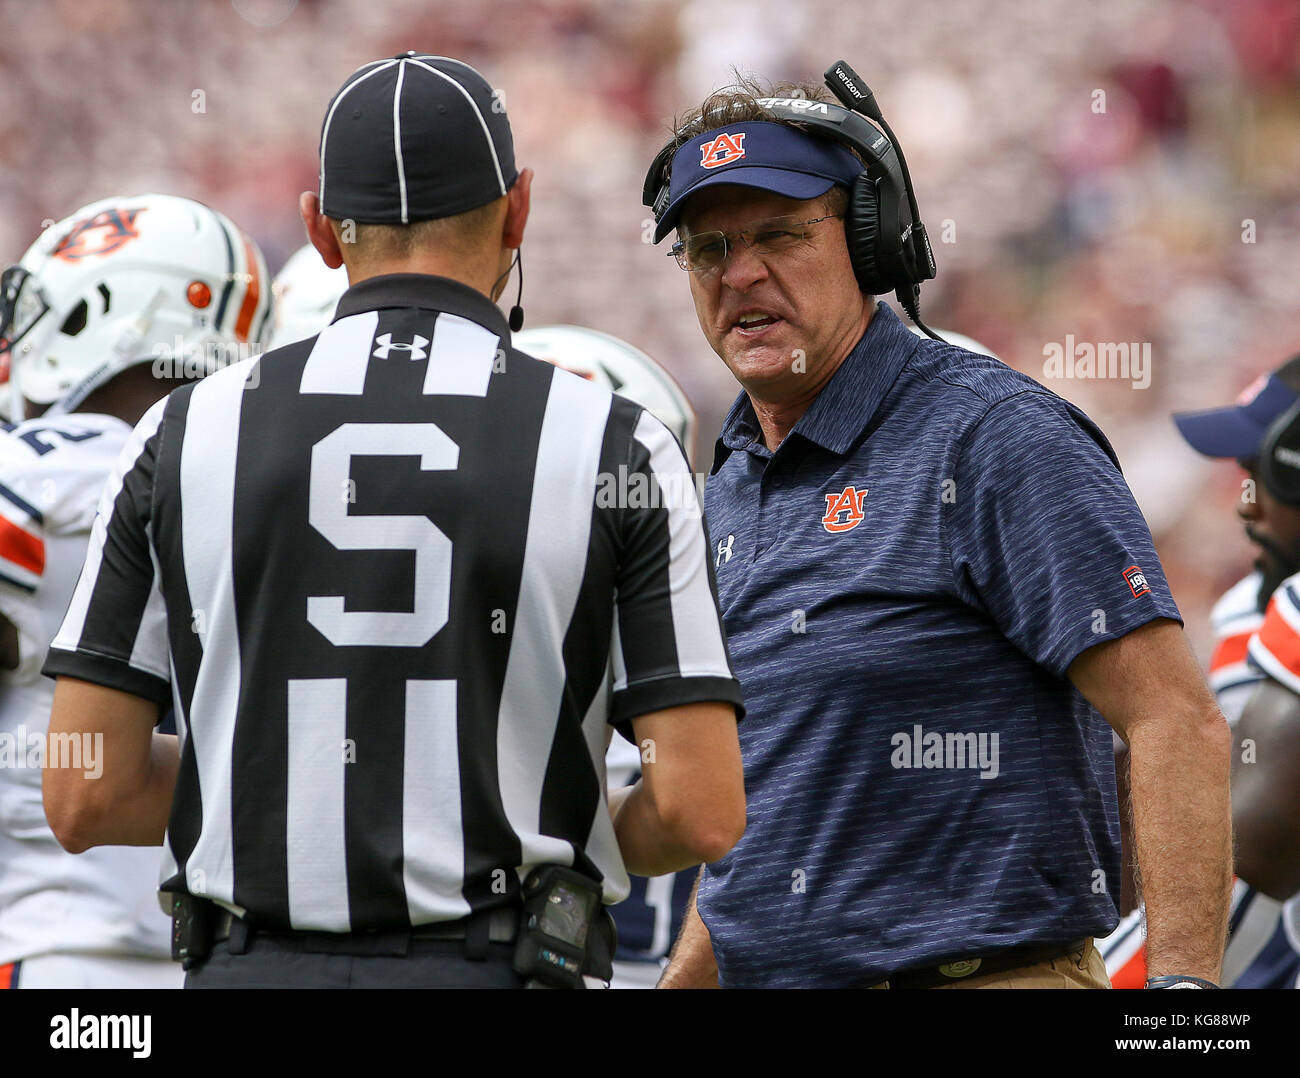 November 4, 2017: Auburn Tigers head coach Gus Malzahn talks to an official in the fourth quarter during the NCAA football game between the Auburn Tigers and the Texas A&M Aggies at Kyle Field in College Station, TX; John Glaser/CSM. Stock Photo